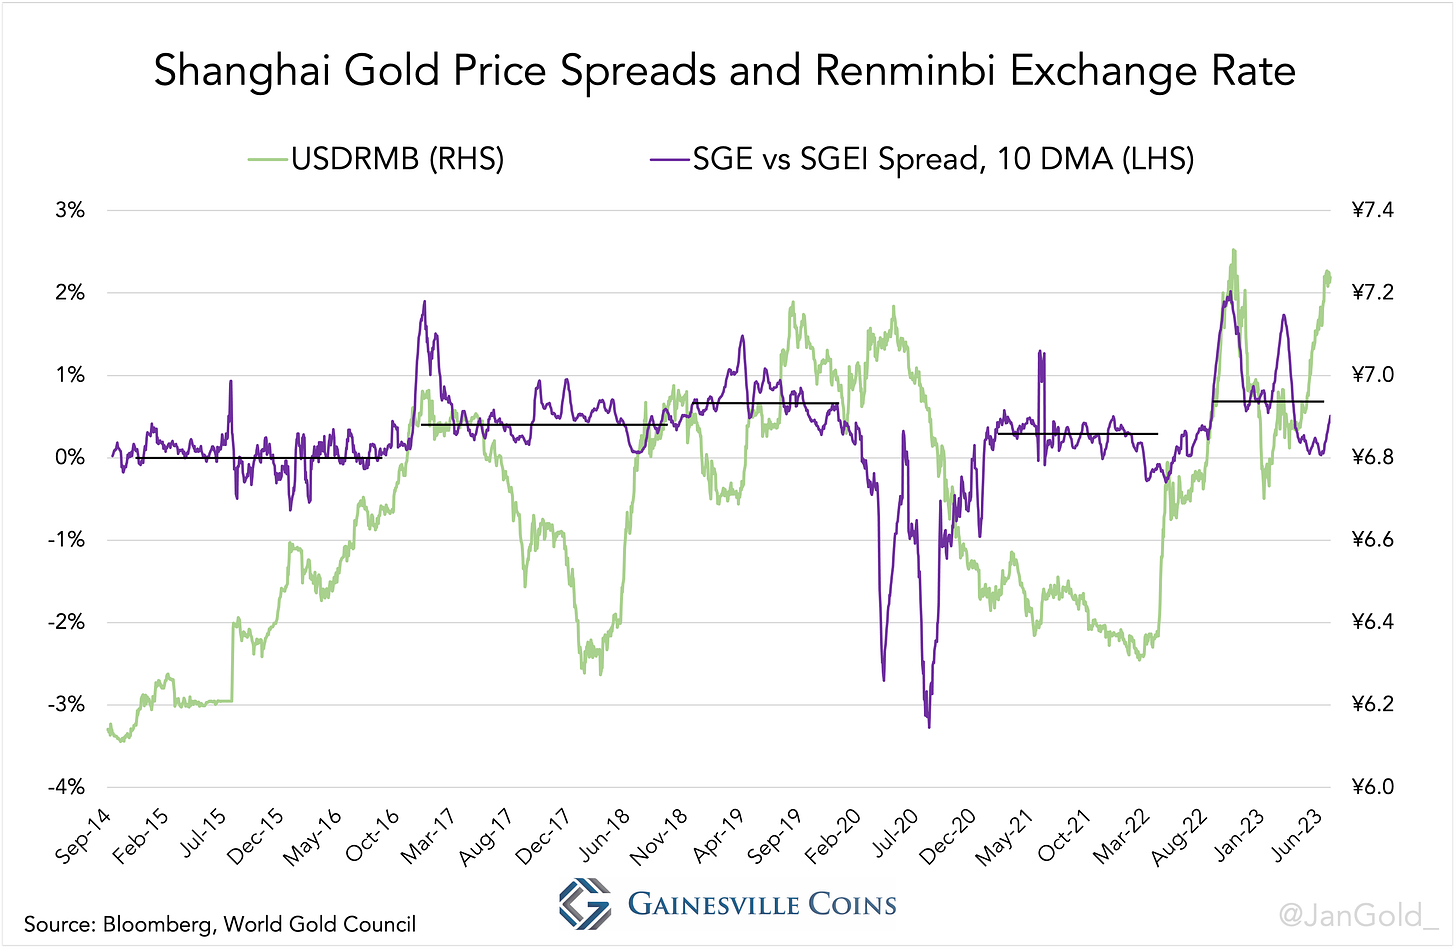 chart showing Shanghai gold price spreads and USDRMB